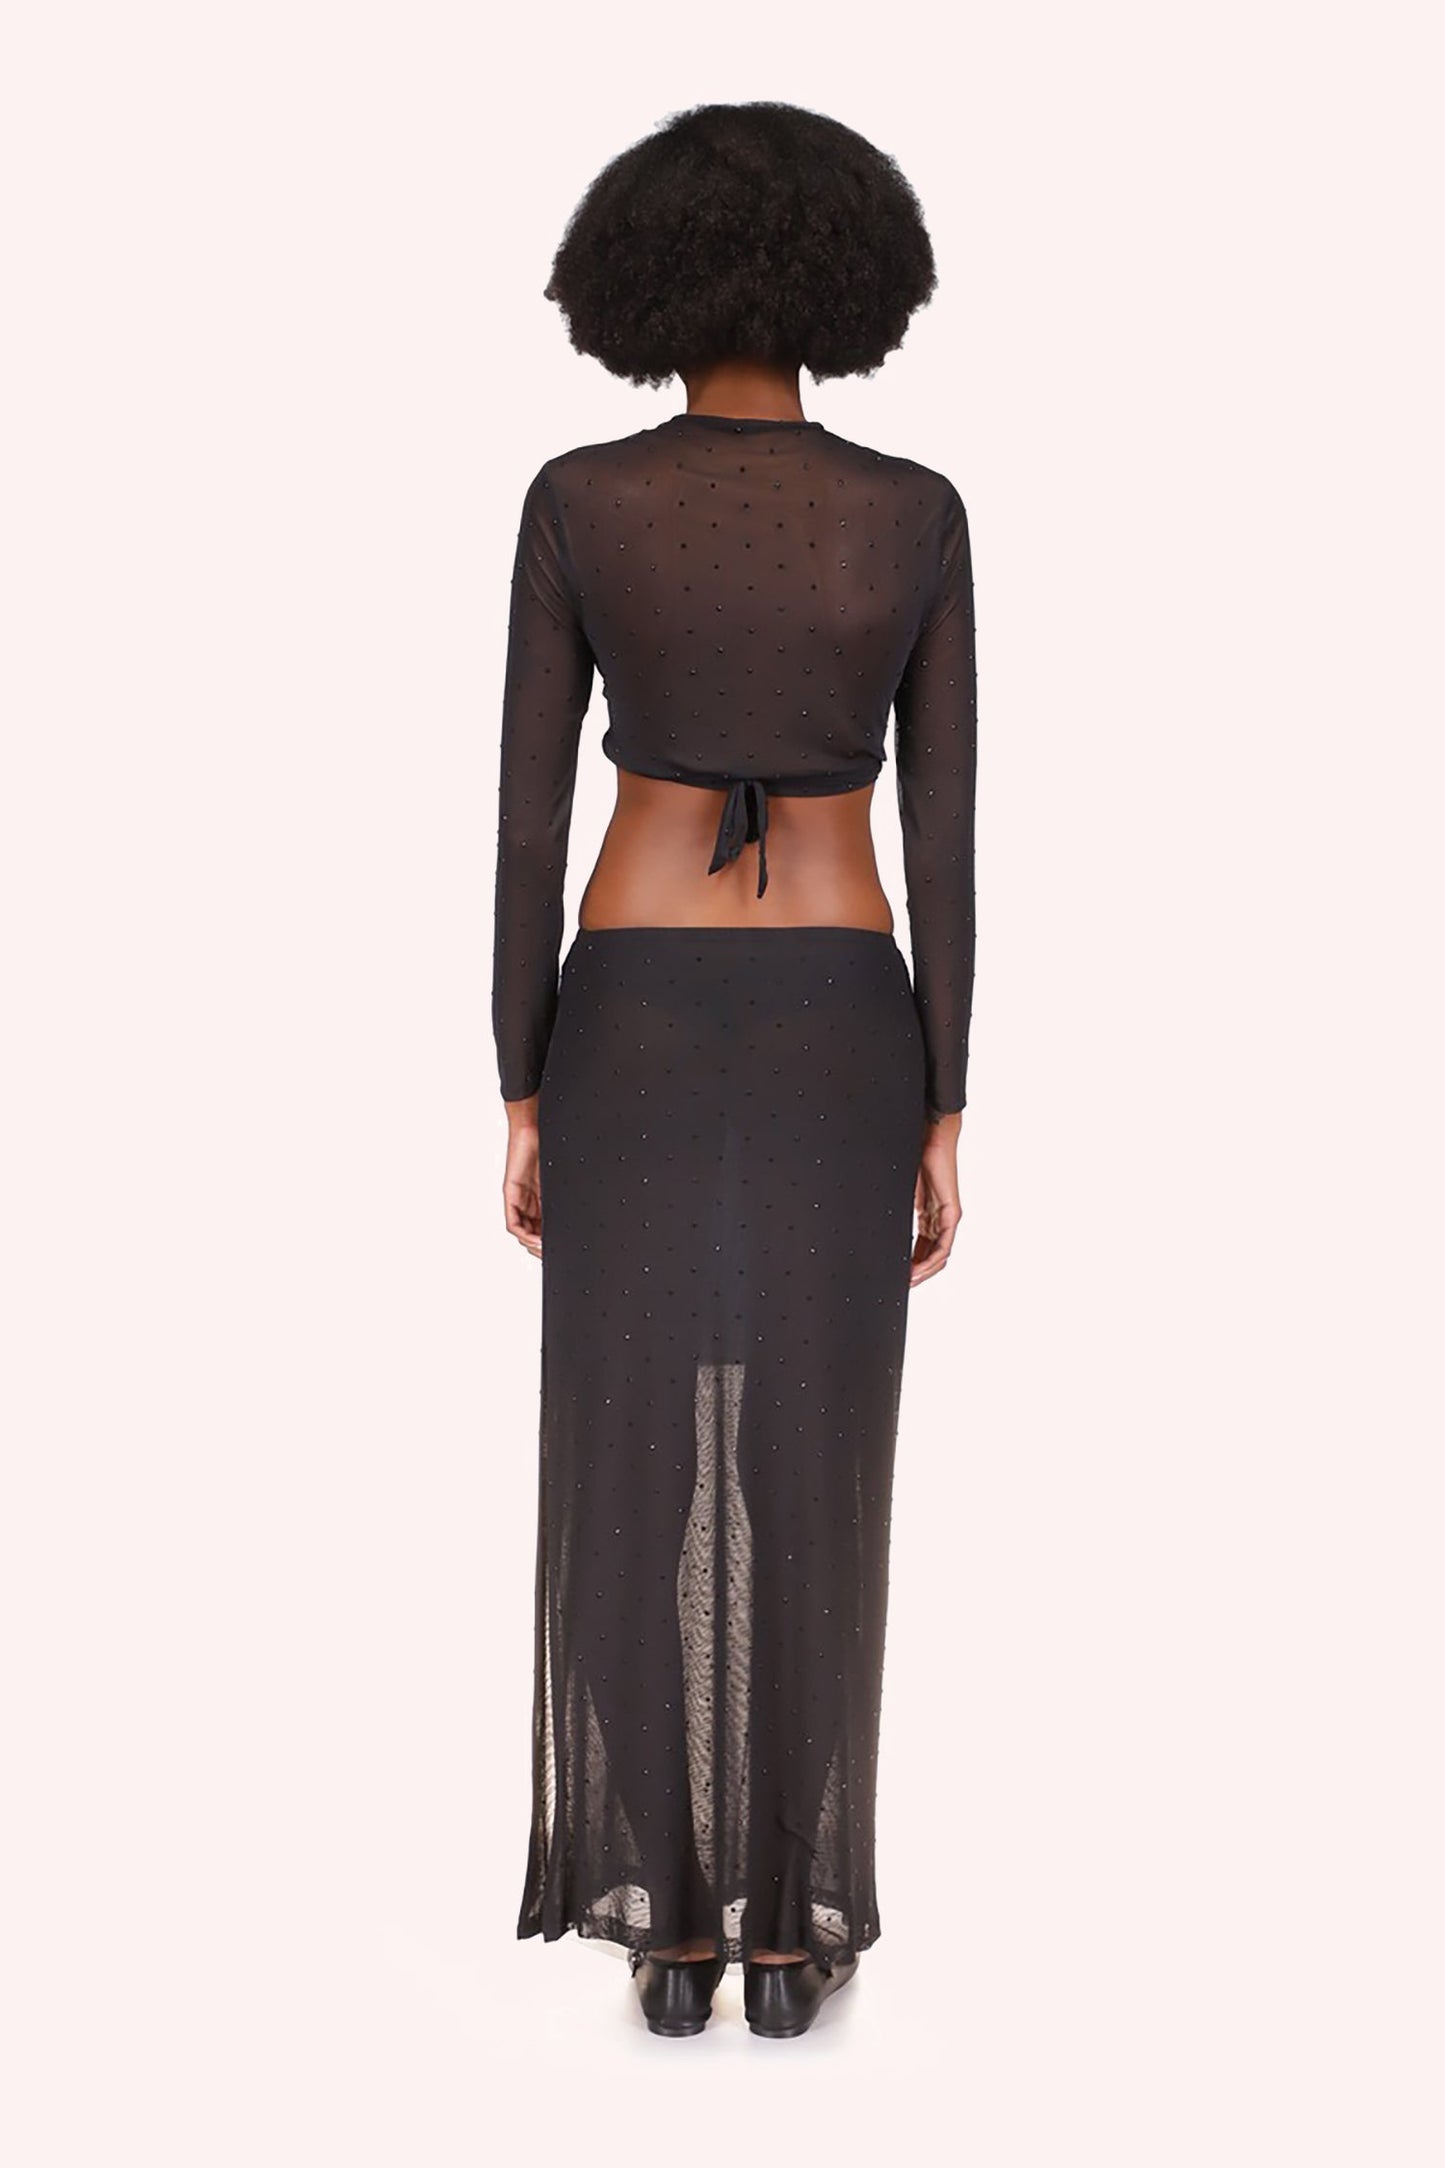 Skirt Black, transparent color mid-tight down, adorned with shiny black beads, ankles long